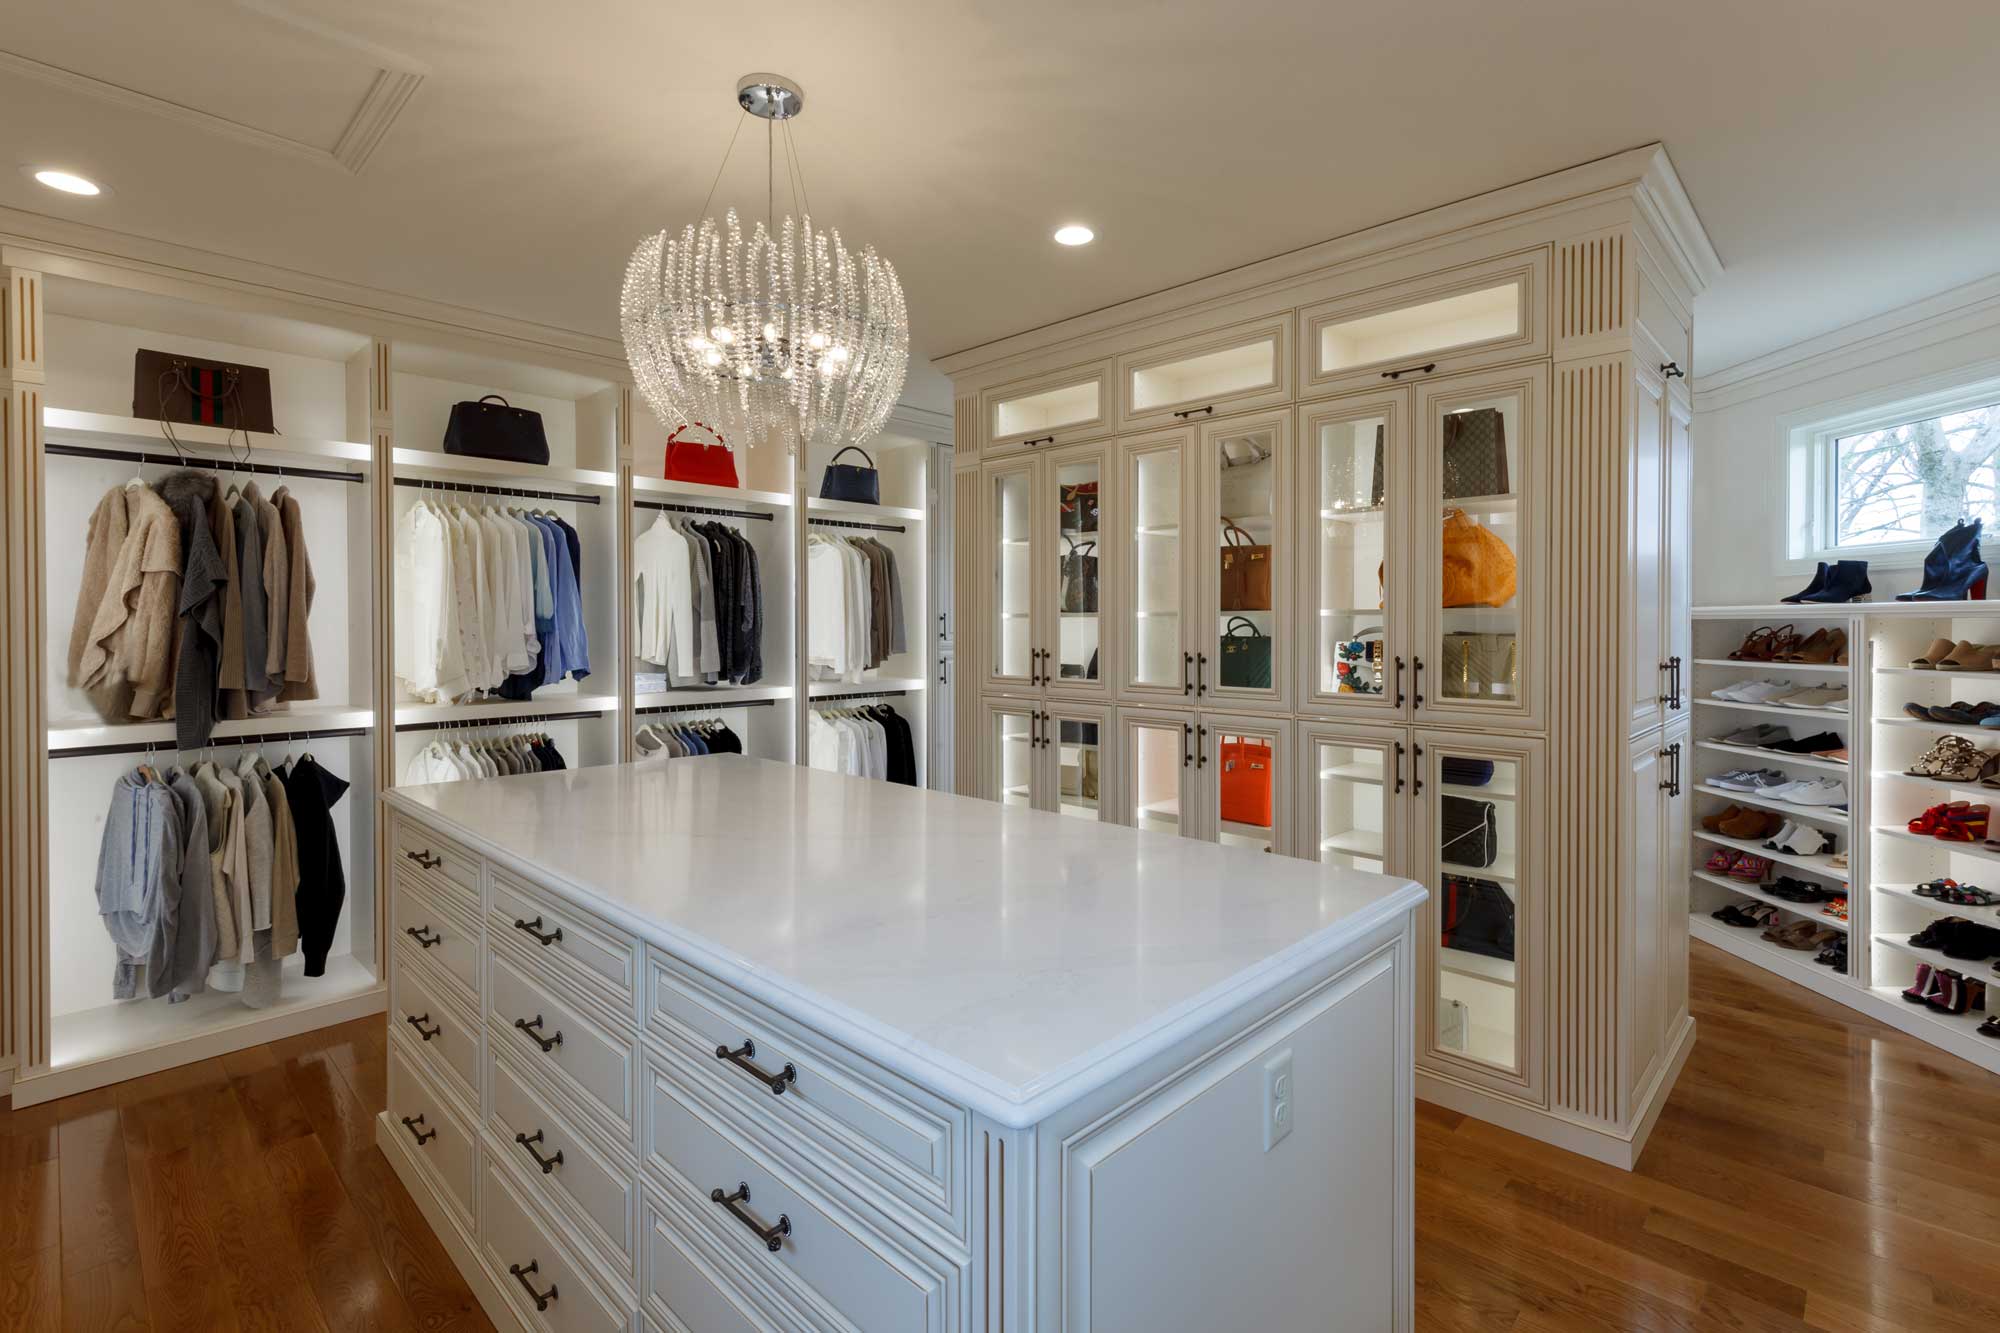 Walk-in closet with extensive shelving surrounding a purse display case